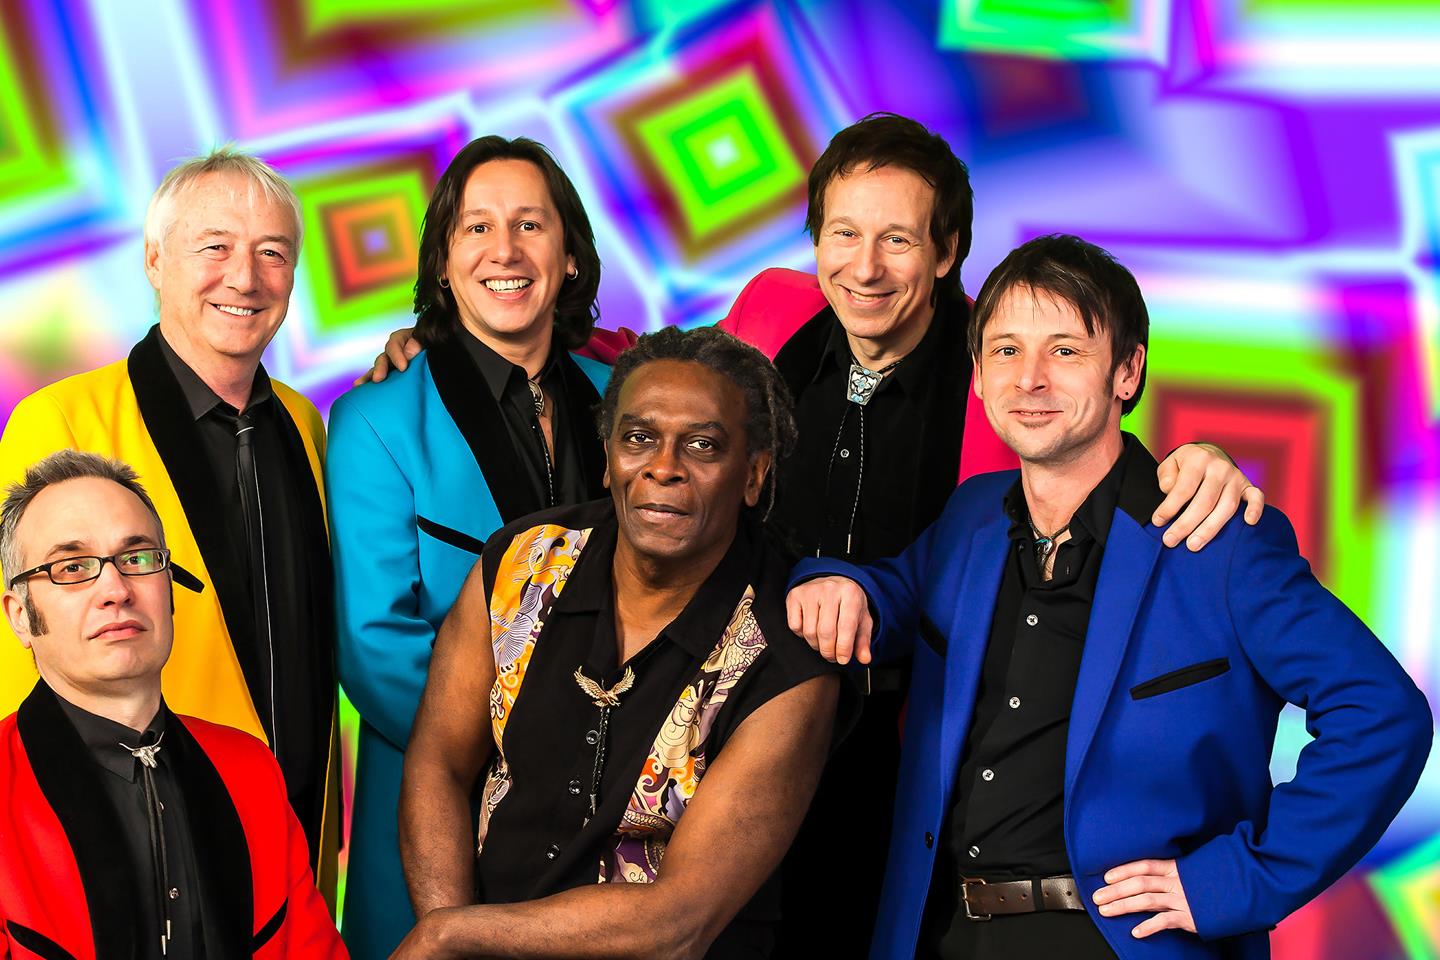 showaddywaddy tour reviews